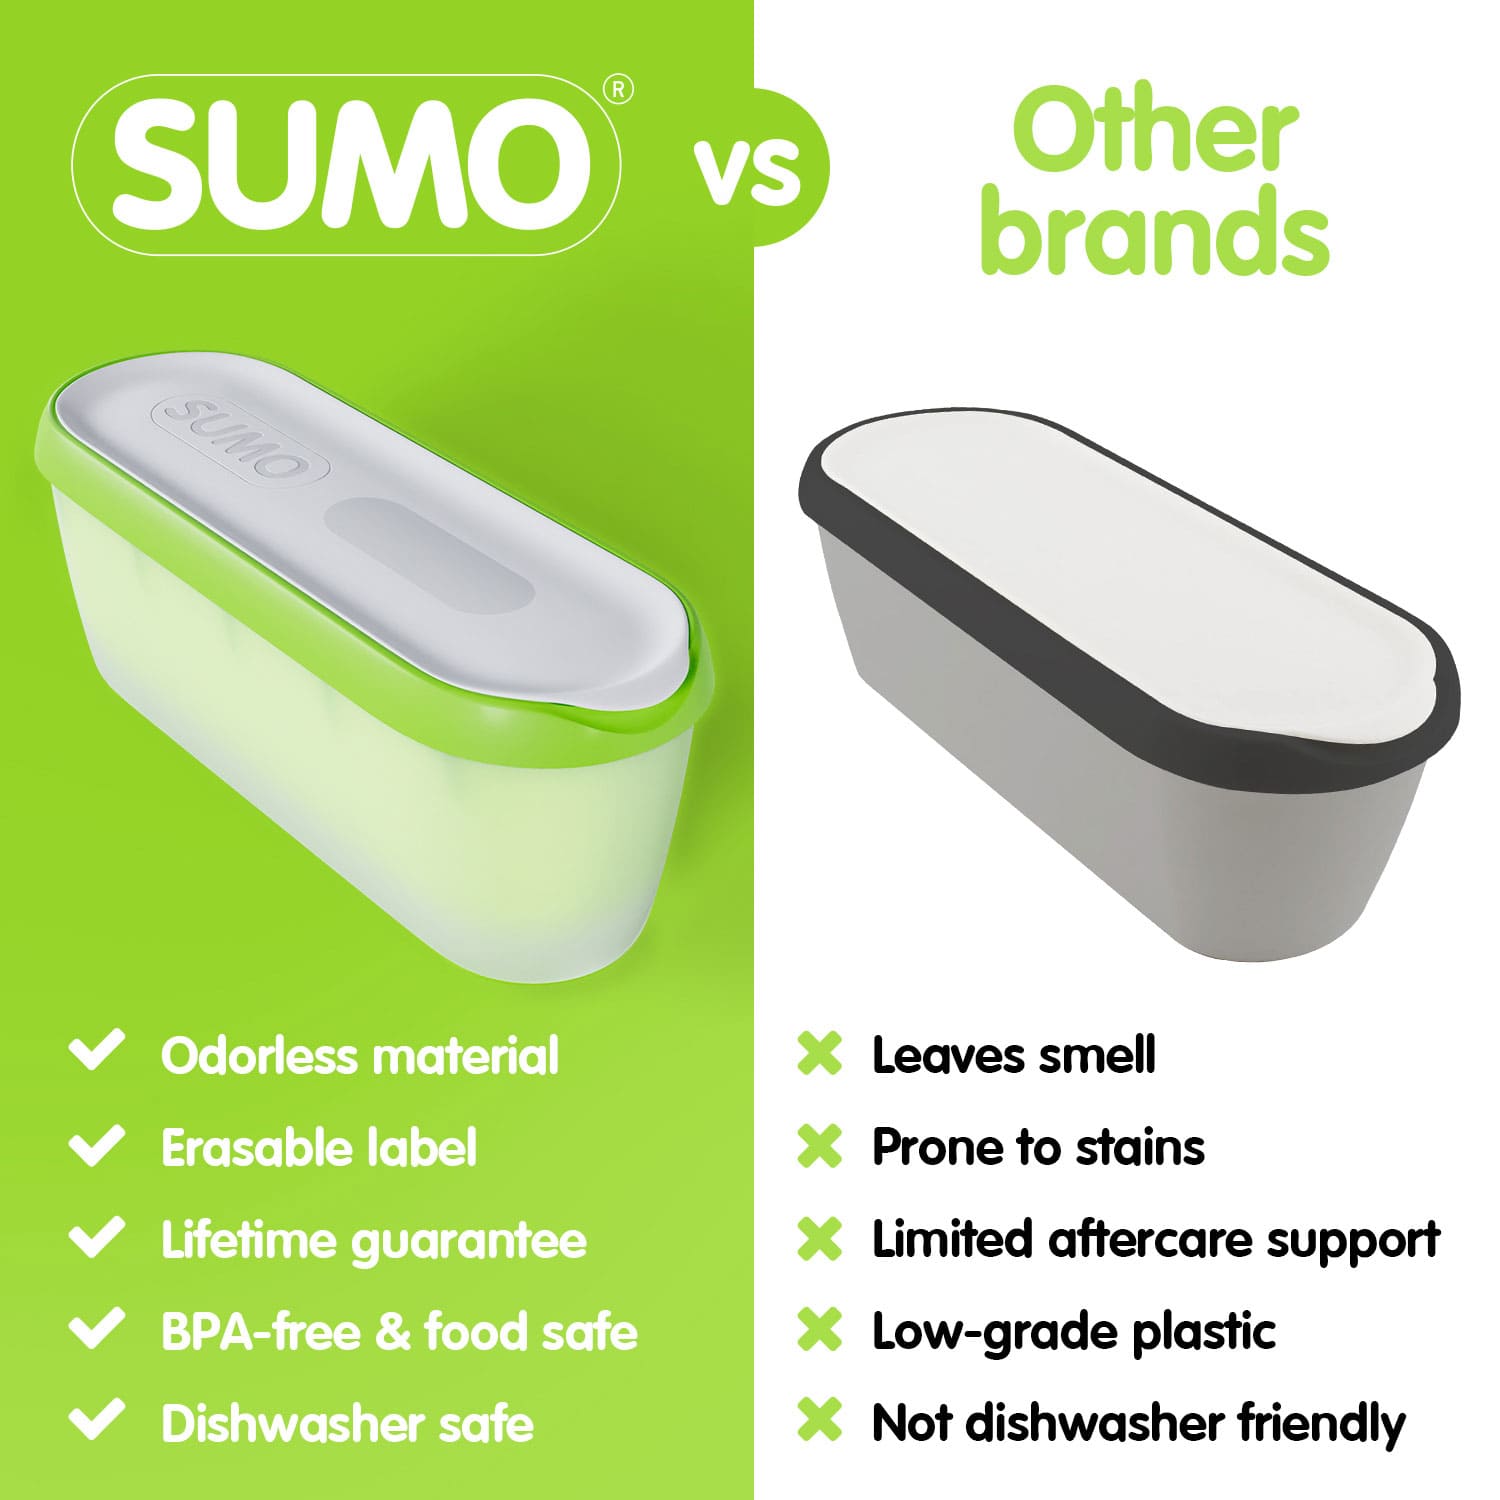 https://sumokitchenware.com/assets/images/products/ice-cream-container/green/4.jpg